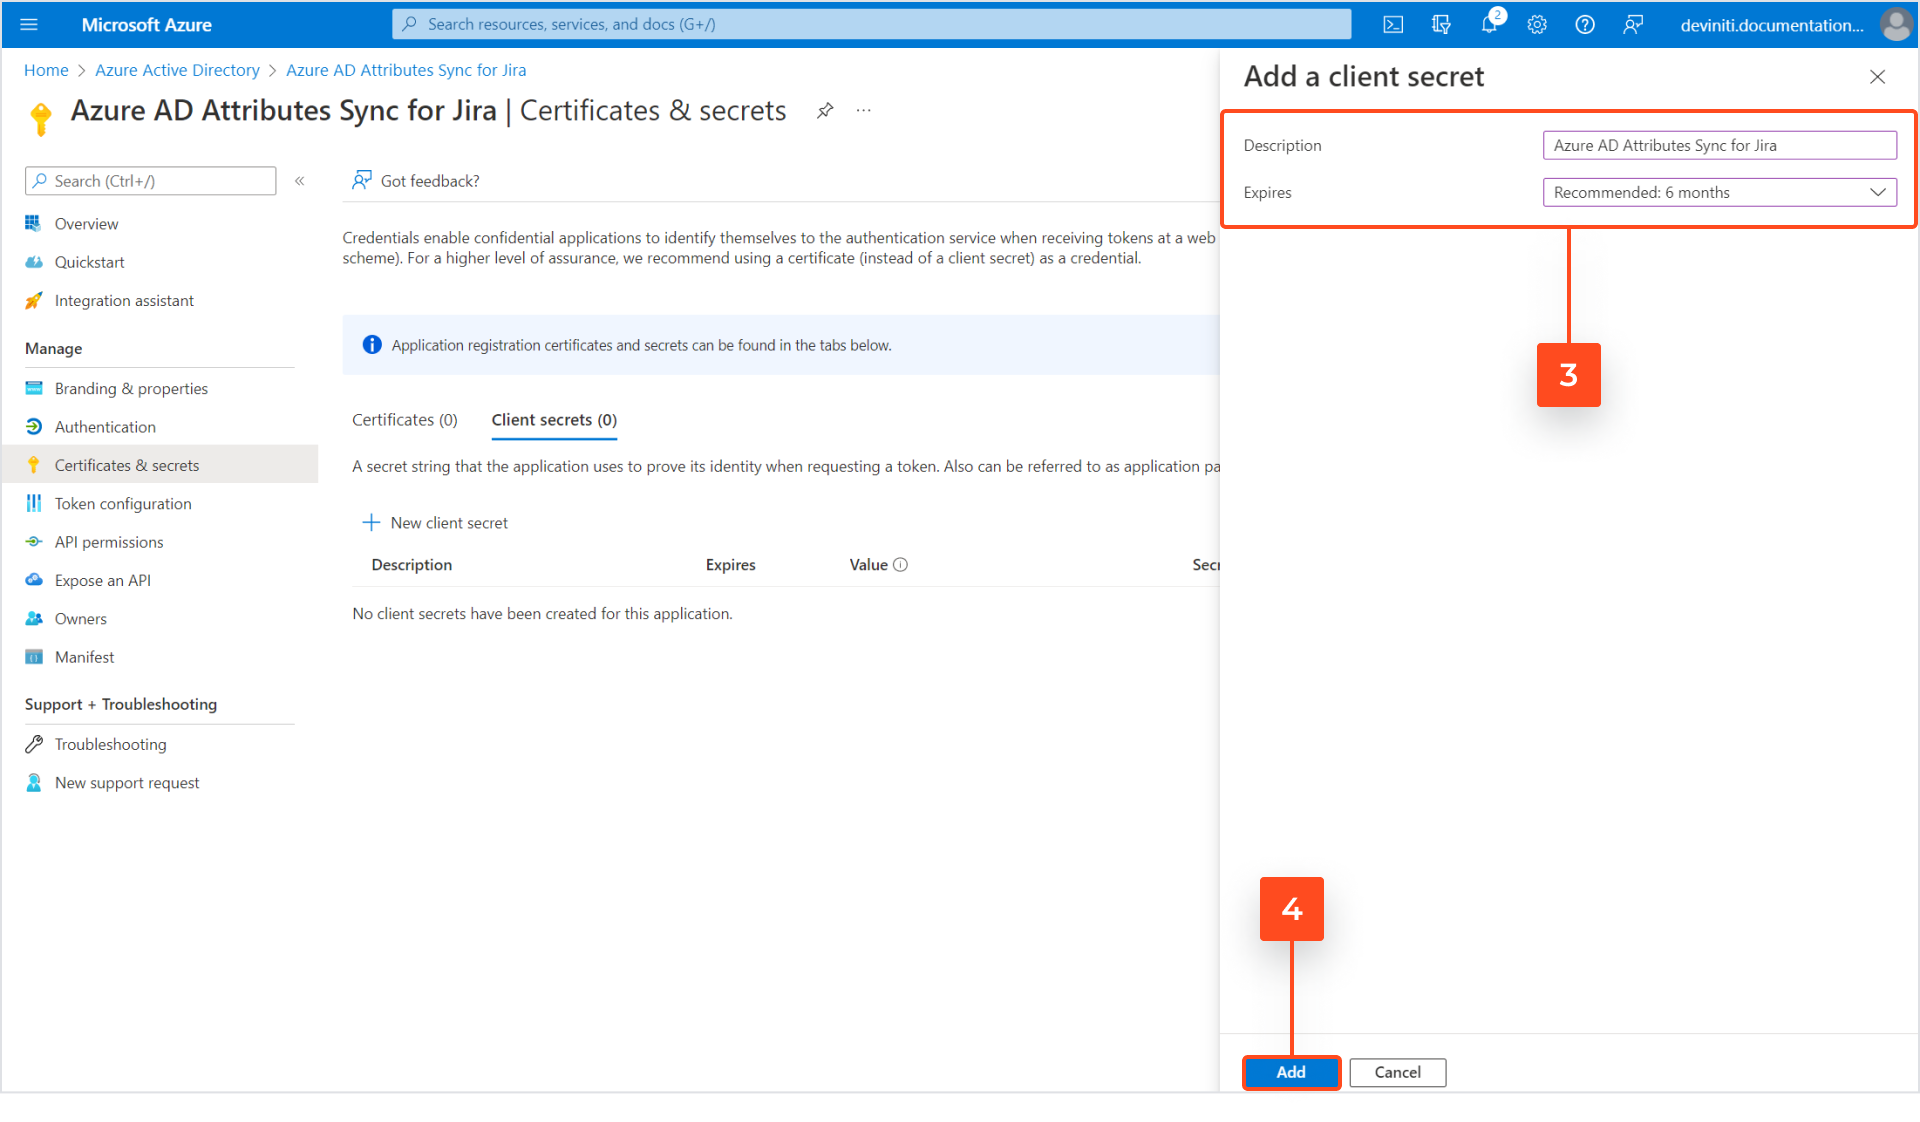 Jira Active Directory integration with Azure AD Attributes - Generating a new client secret in Azure